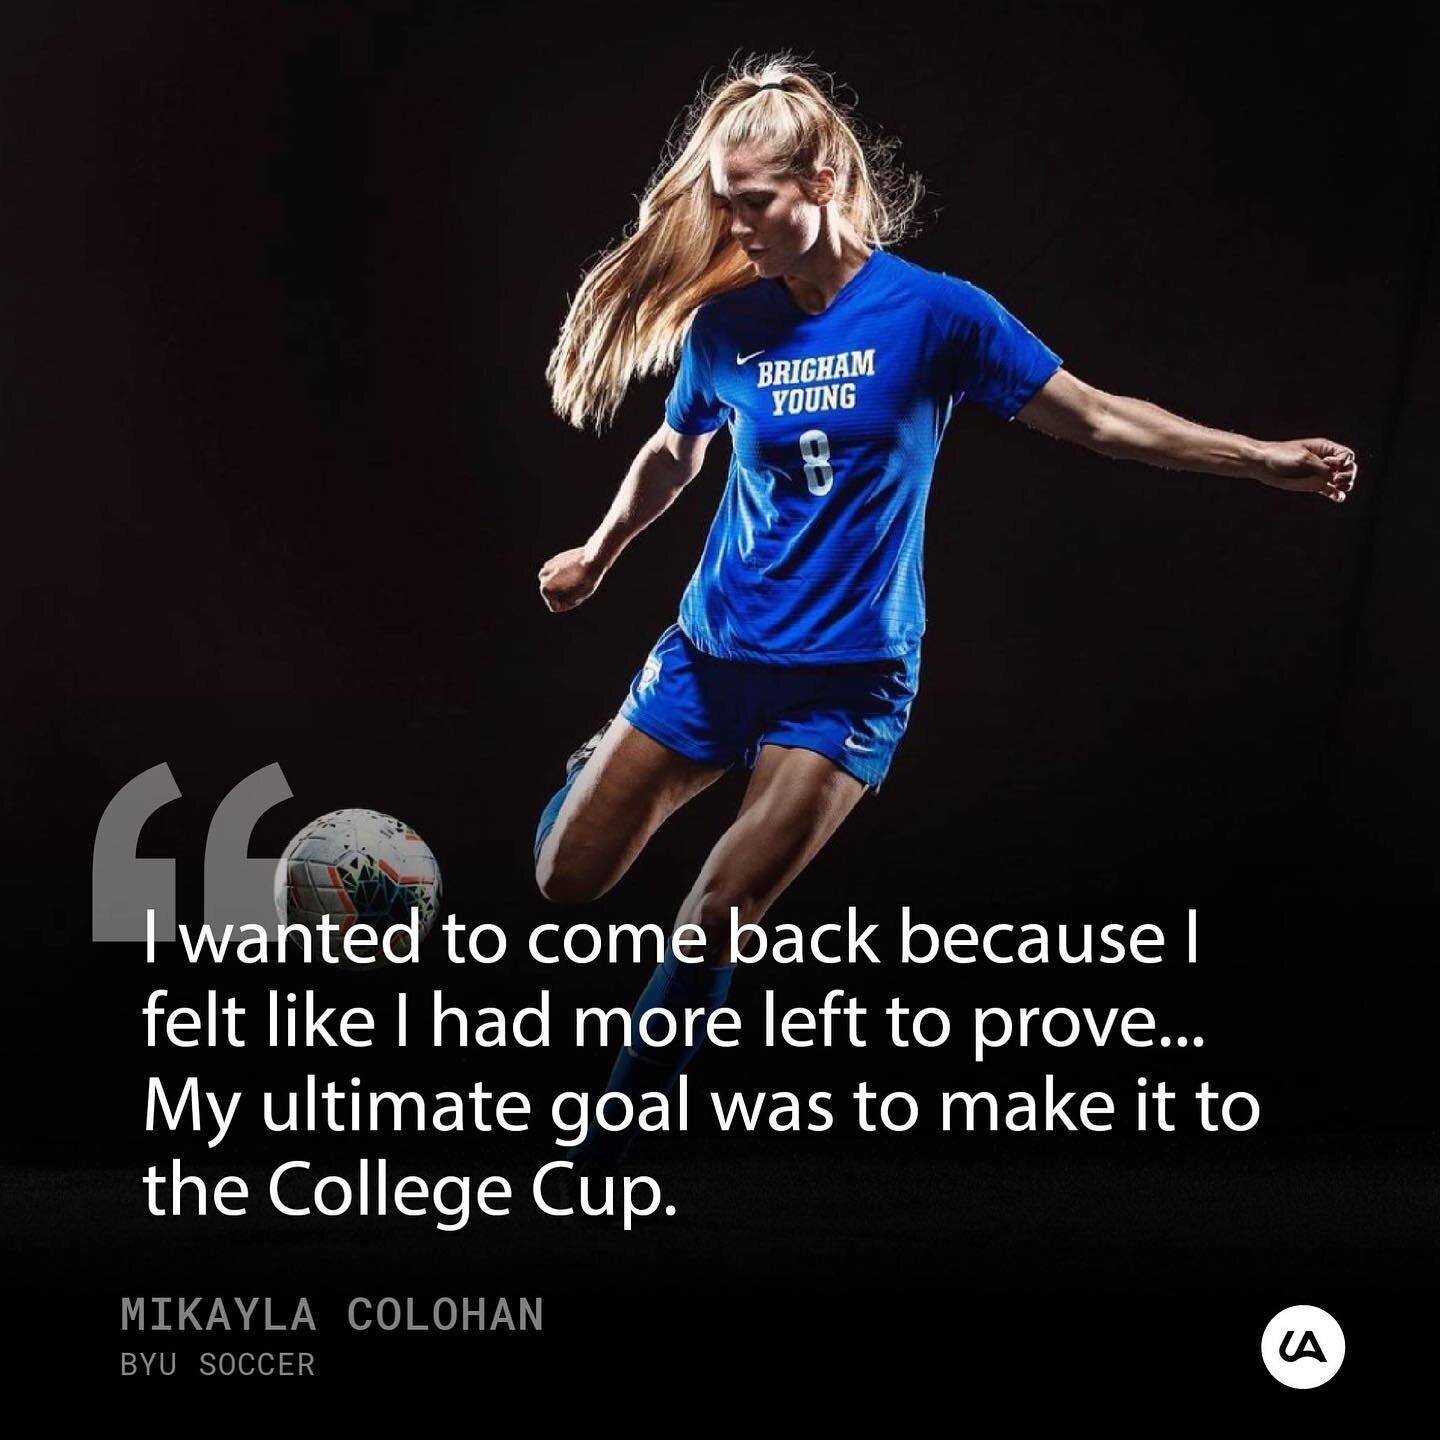 Mikayla Colohan was drafted 14th overall in the 2021 NWSL draft. Instead of going straight to the pros, Colohan chose to return to BYU for one final season.

Tomorrow, Colohan leads the Cougars to their first Final Four in program history! Link in bi